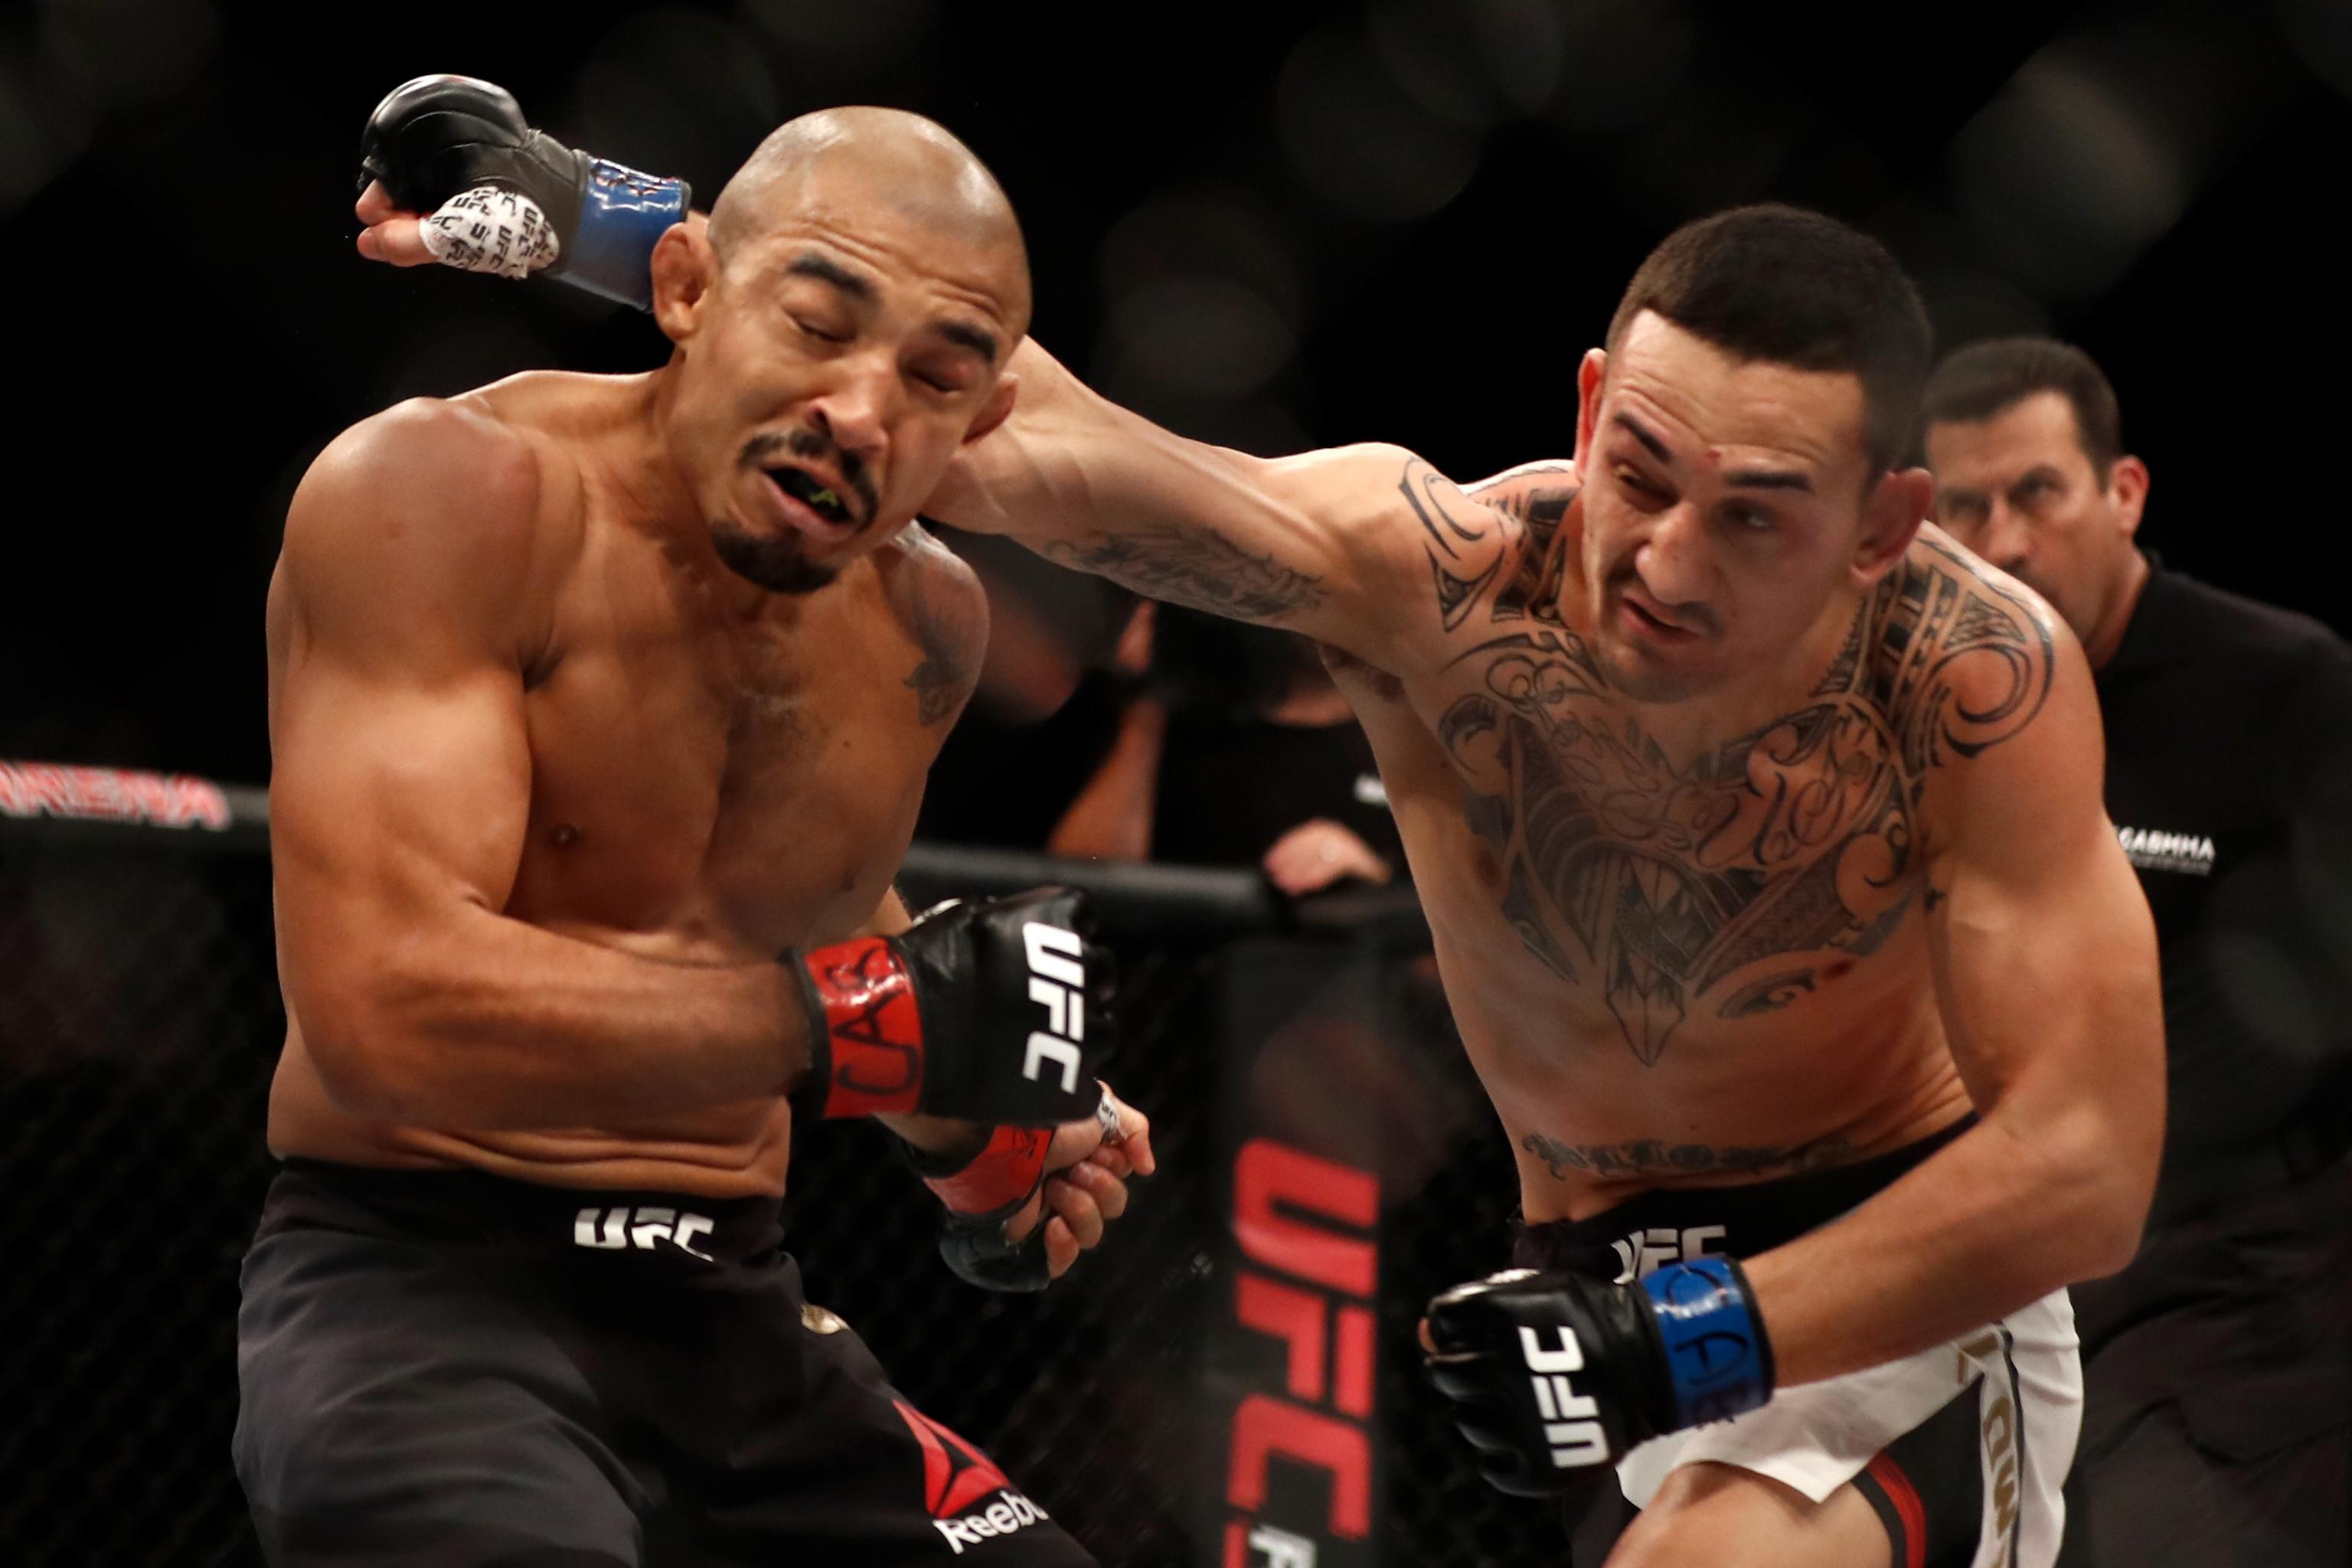 Jose Aldo Suffered Leg Injury Prior to UFC 212 to Max Holloway | Bleacher Report | Latest News, Videos and Highlights